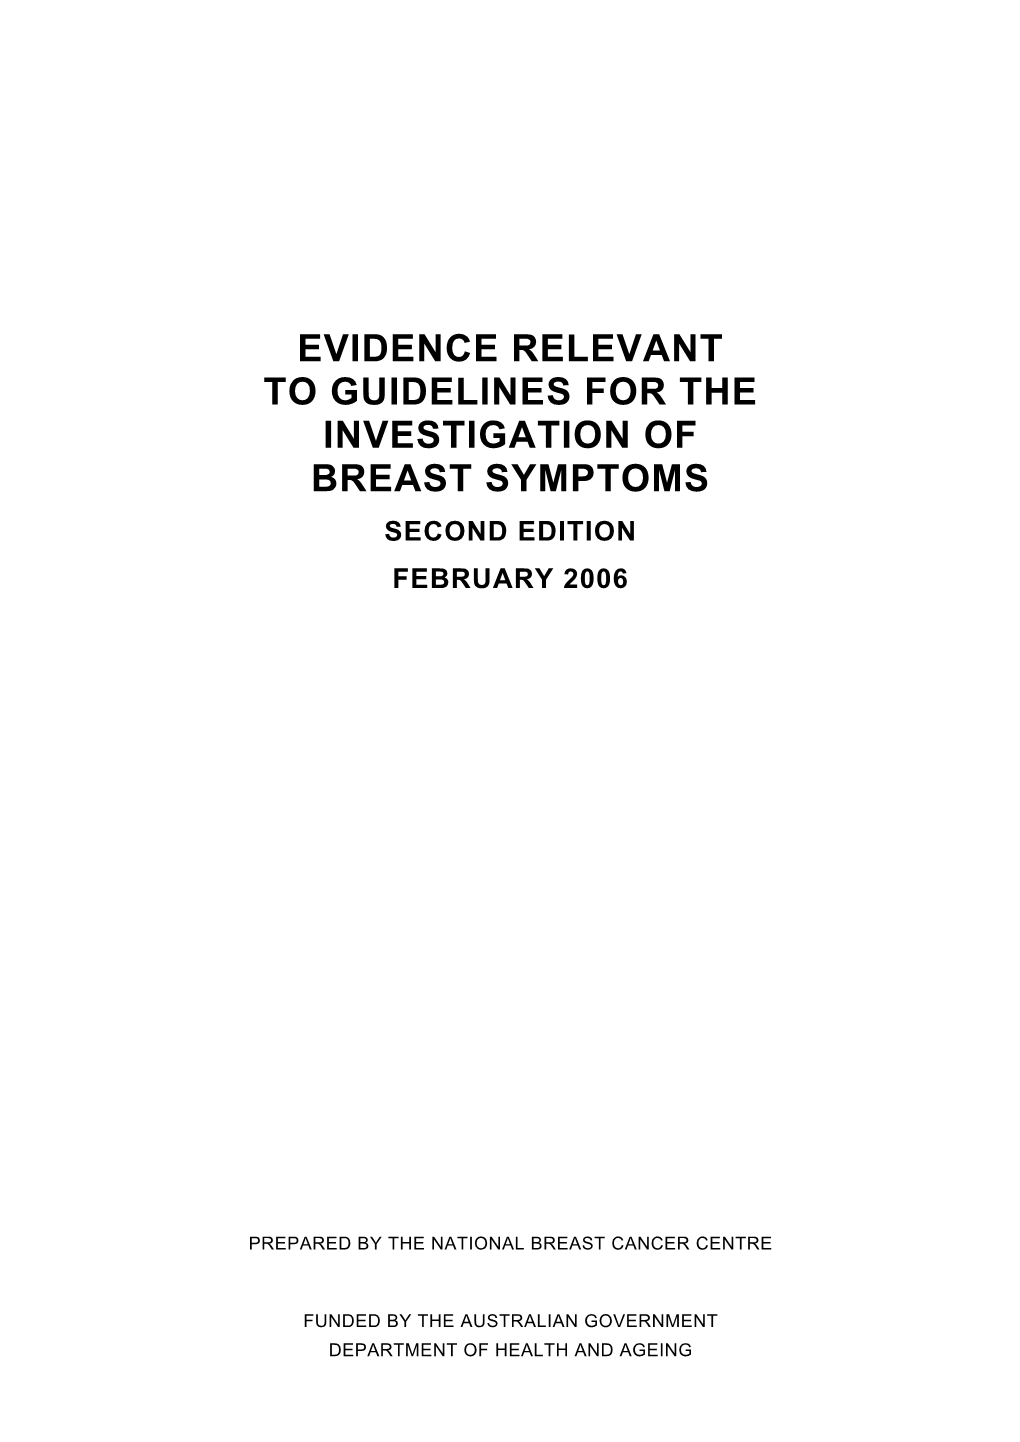 Evidence Relevant to Guidelines for the Investigation of Breast Symptoms Second Edition February 2006